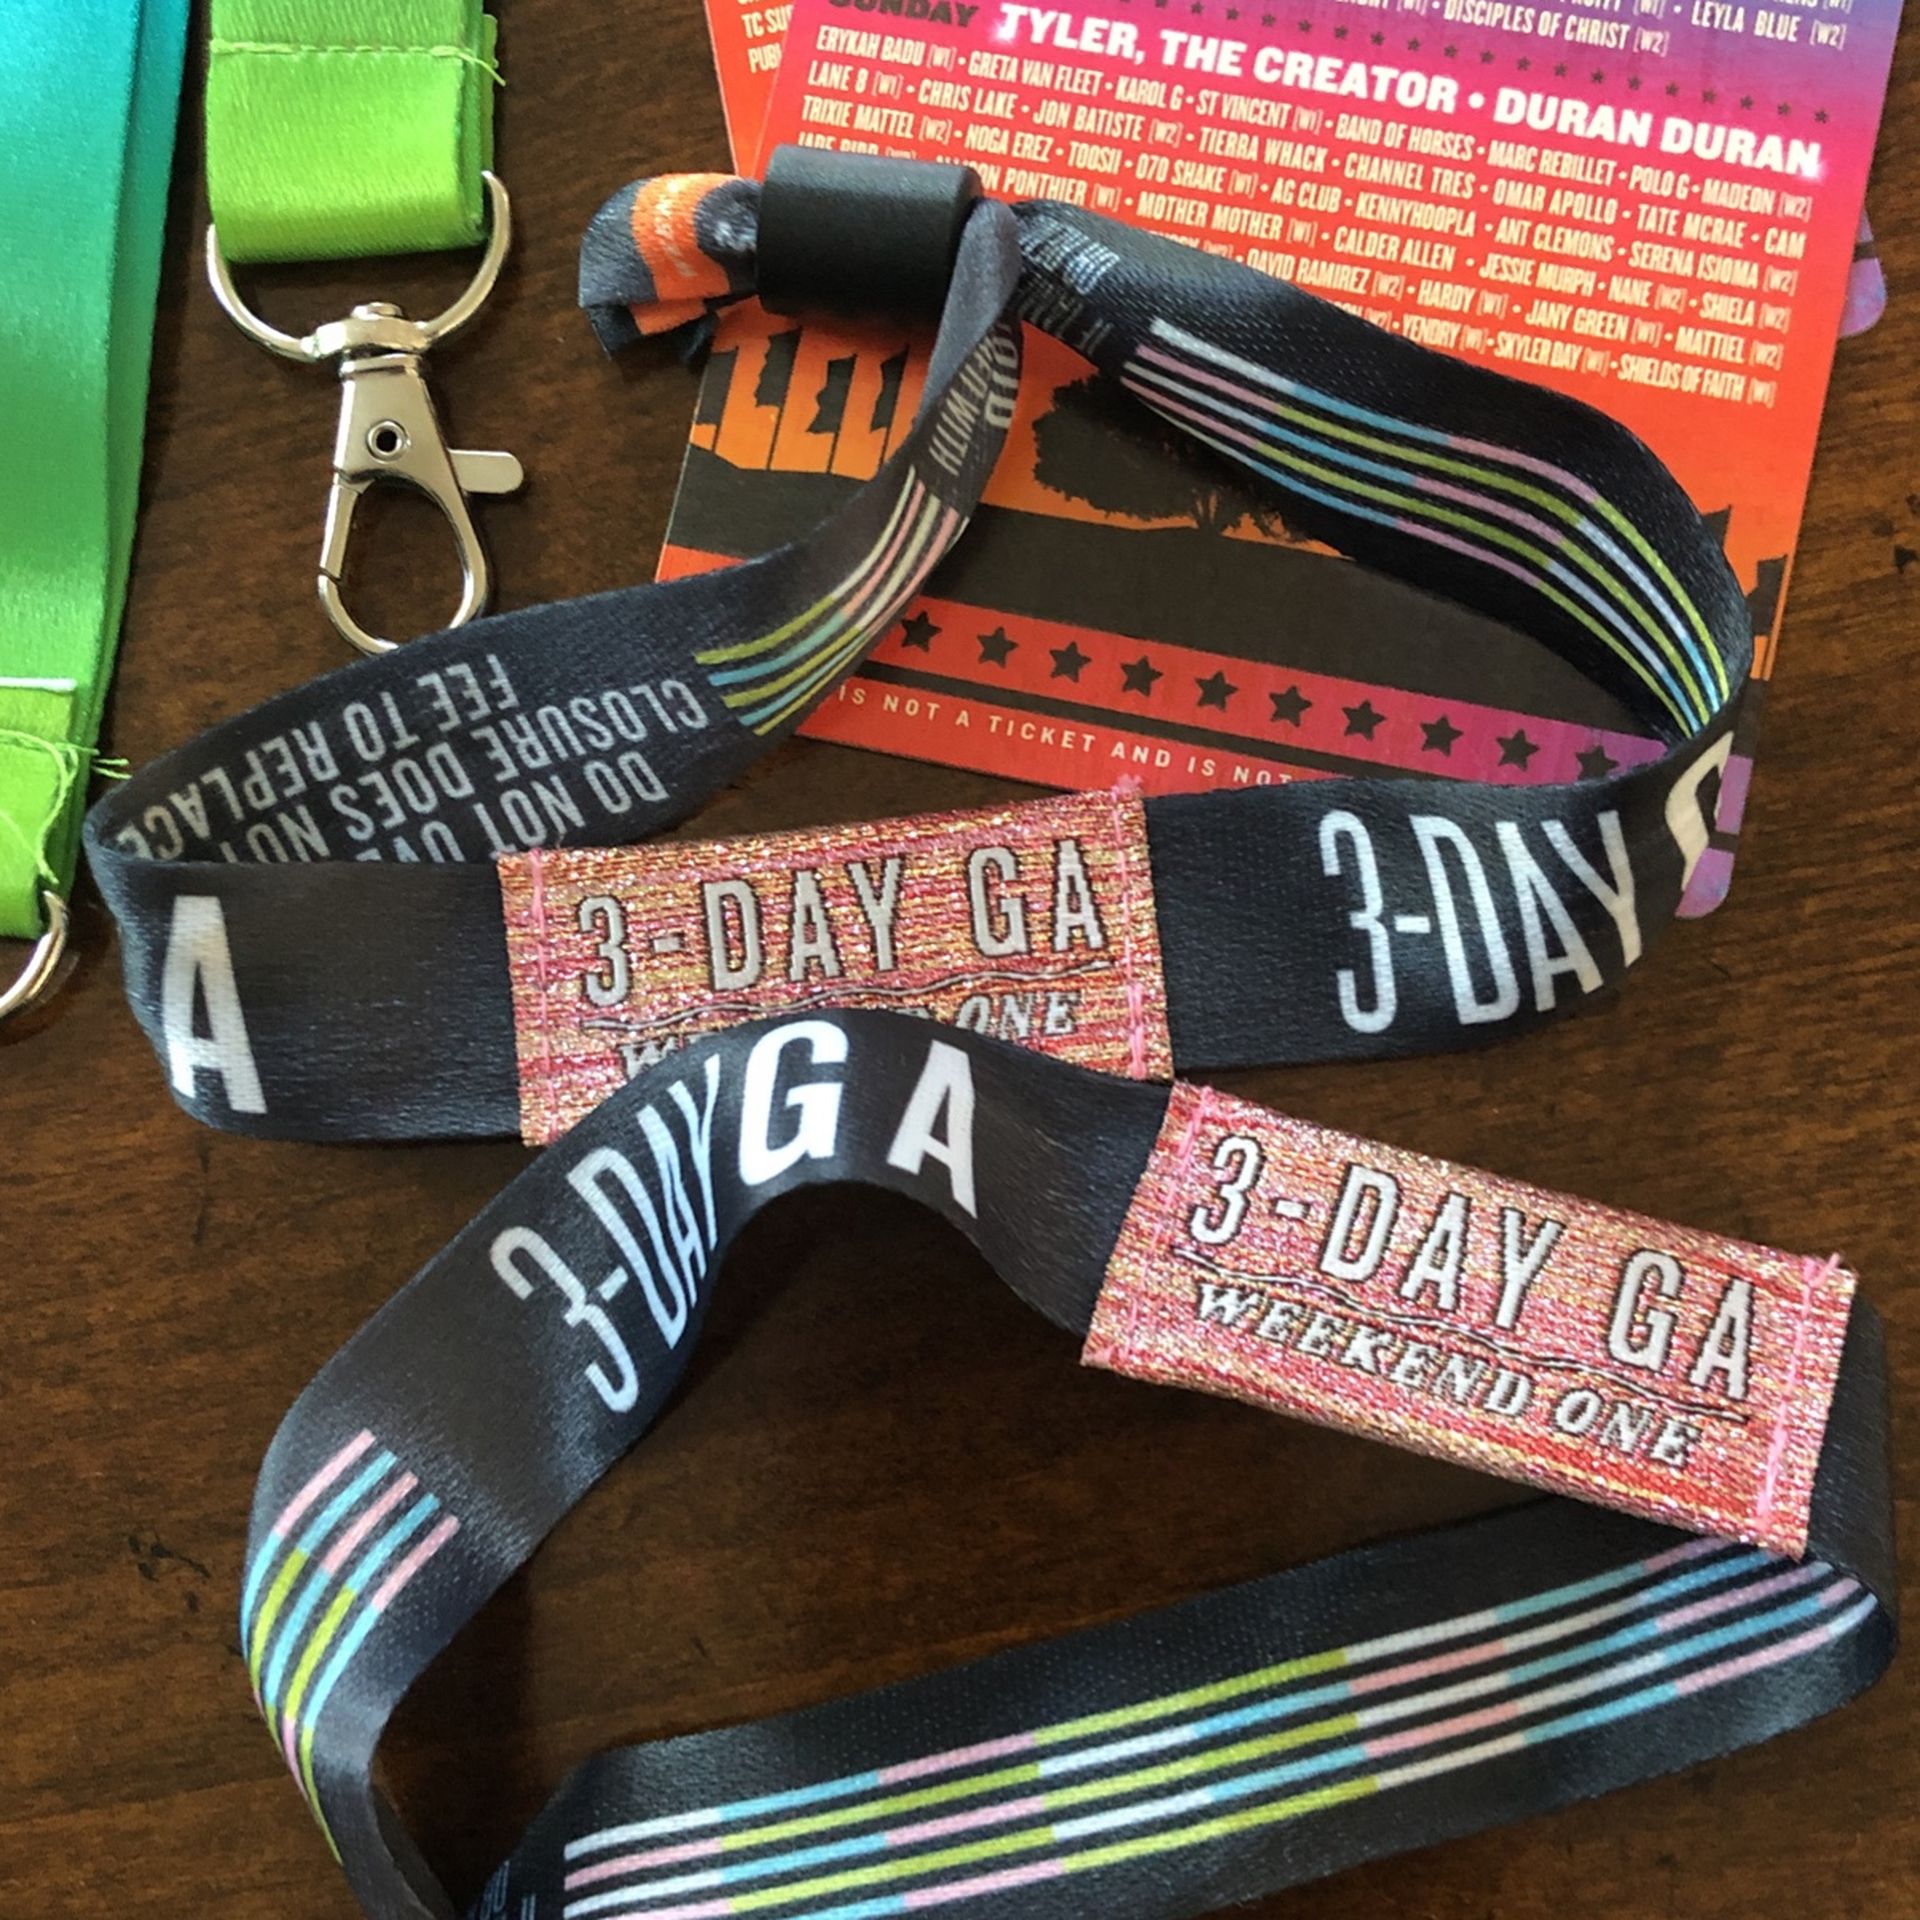 1 ACL Fest Wkend 1,   3-day Wristband 